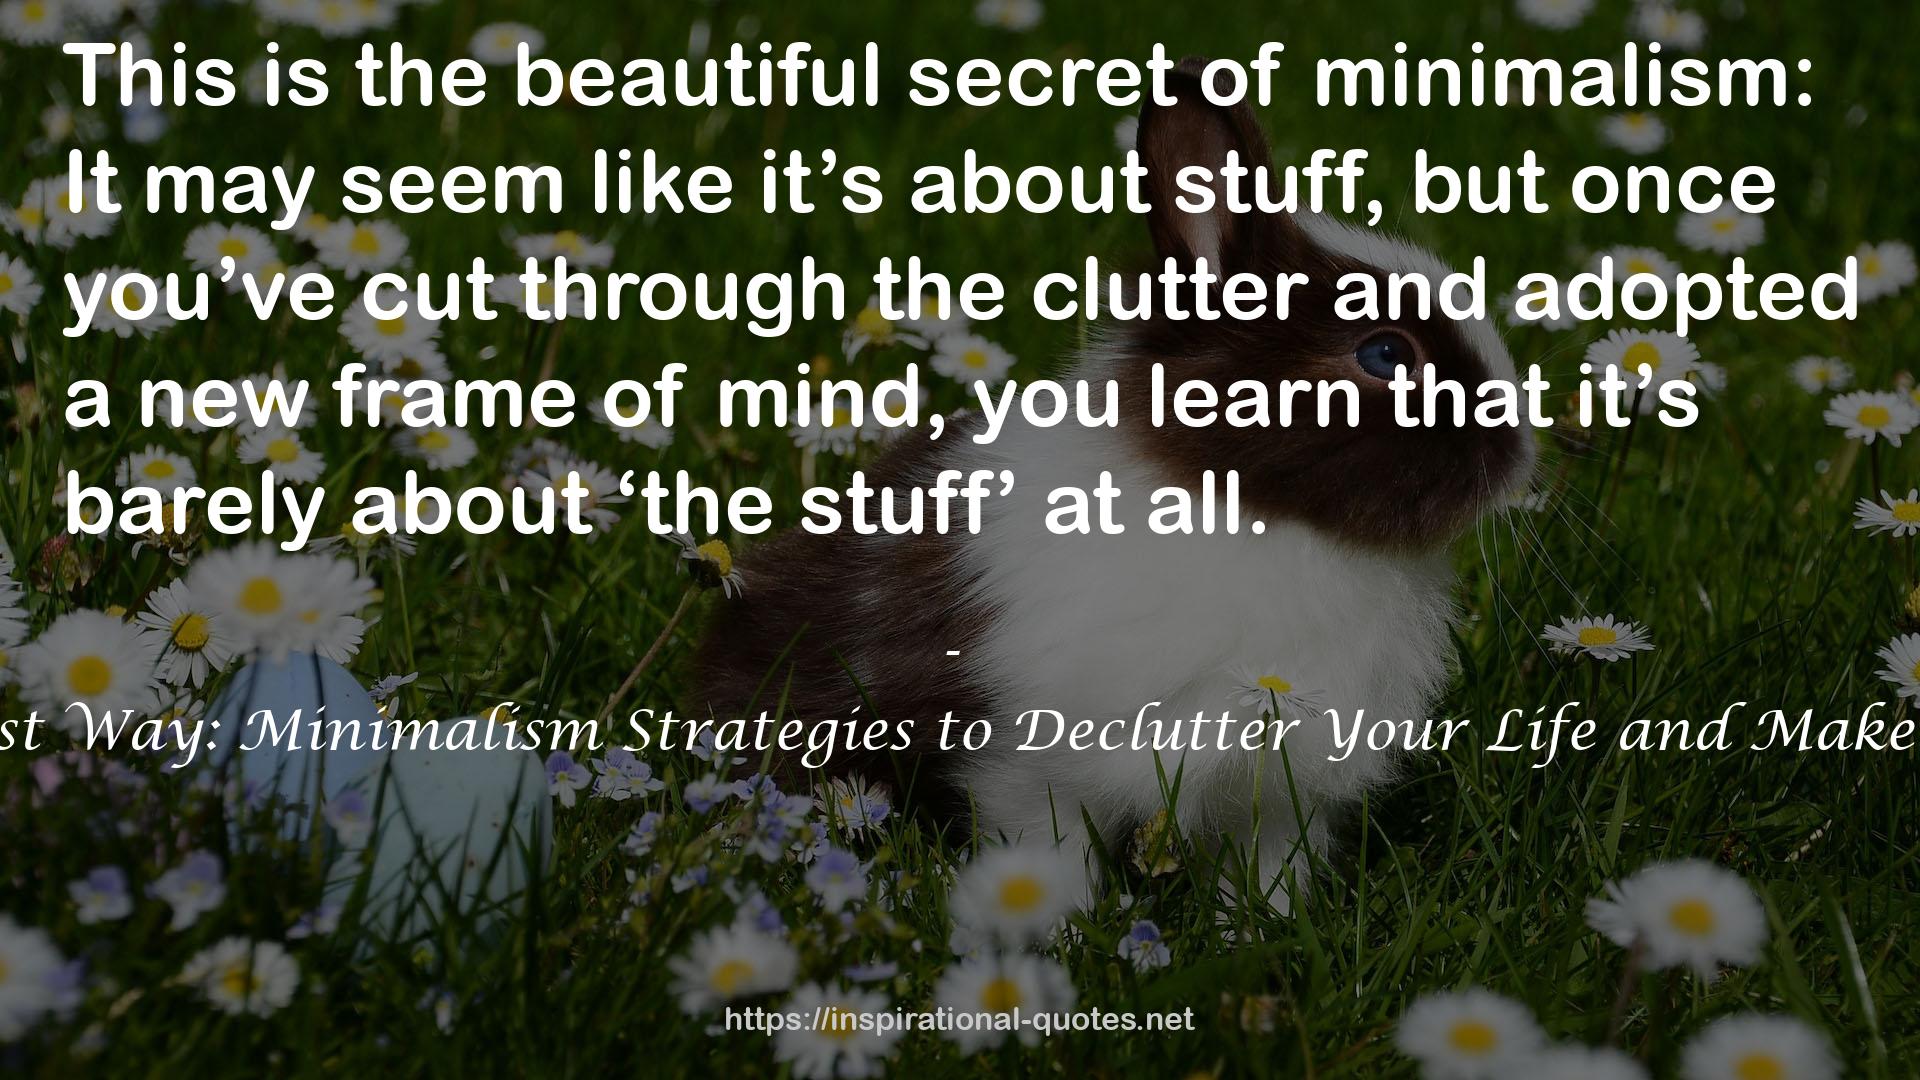 The Minimalist Way: Minimalism Strategies to Declutter Your Life and Make Room for Joy QUOTES